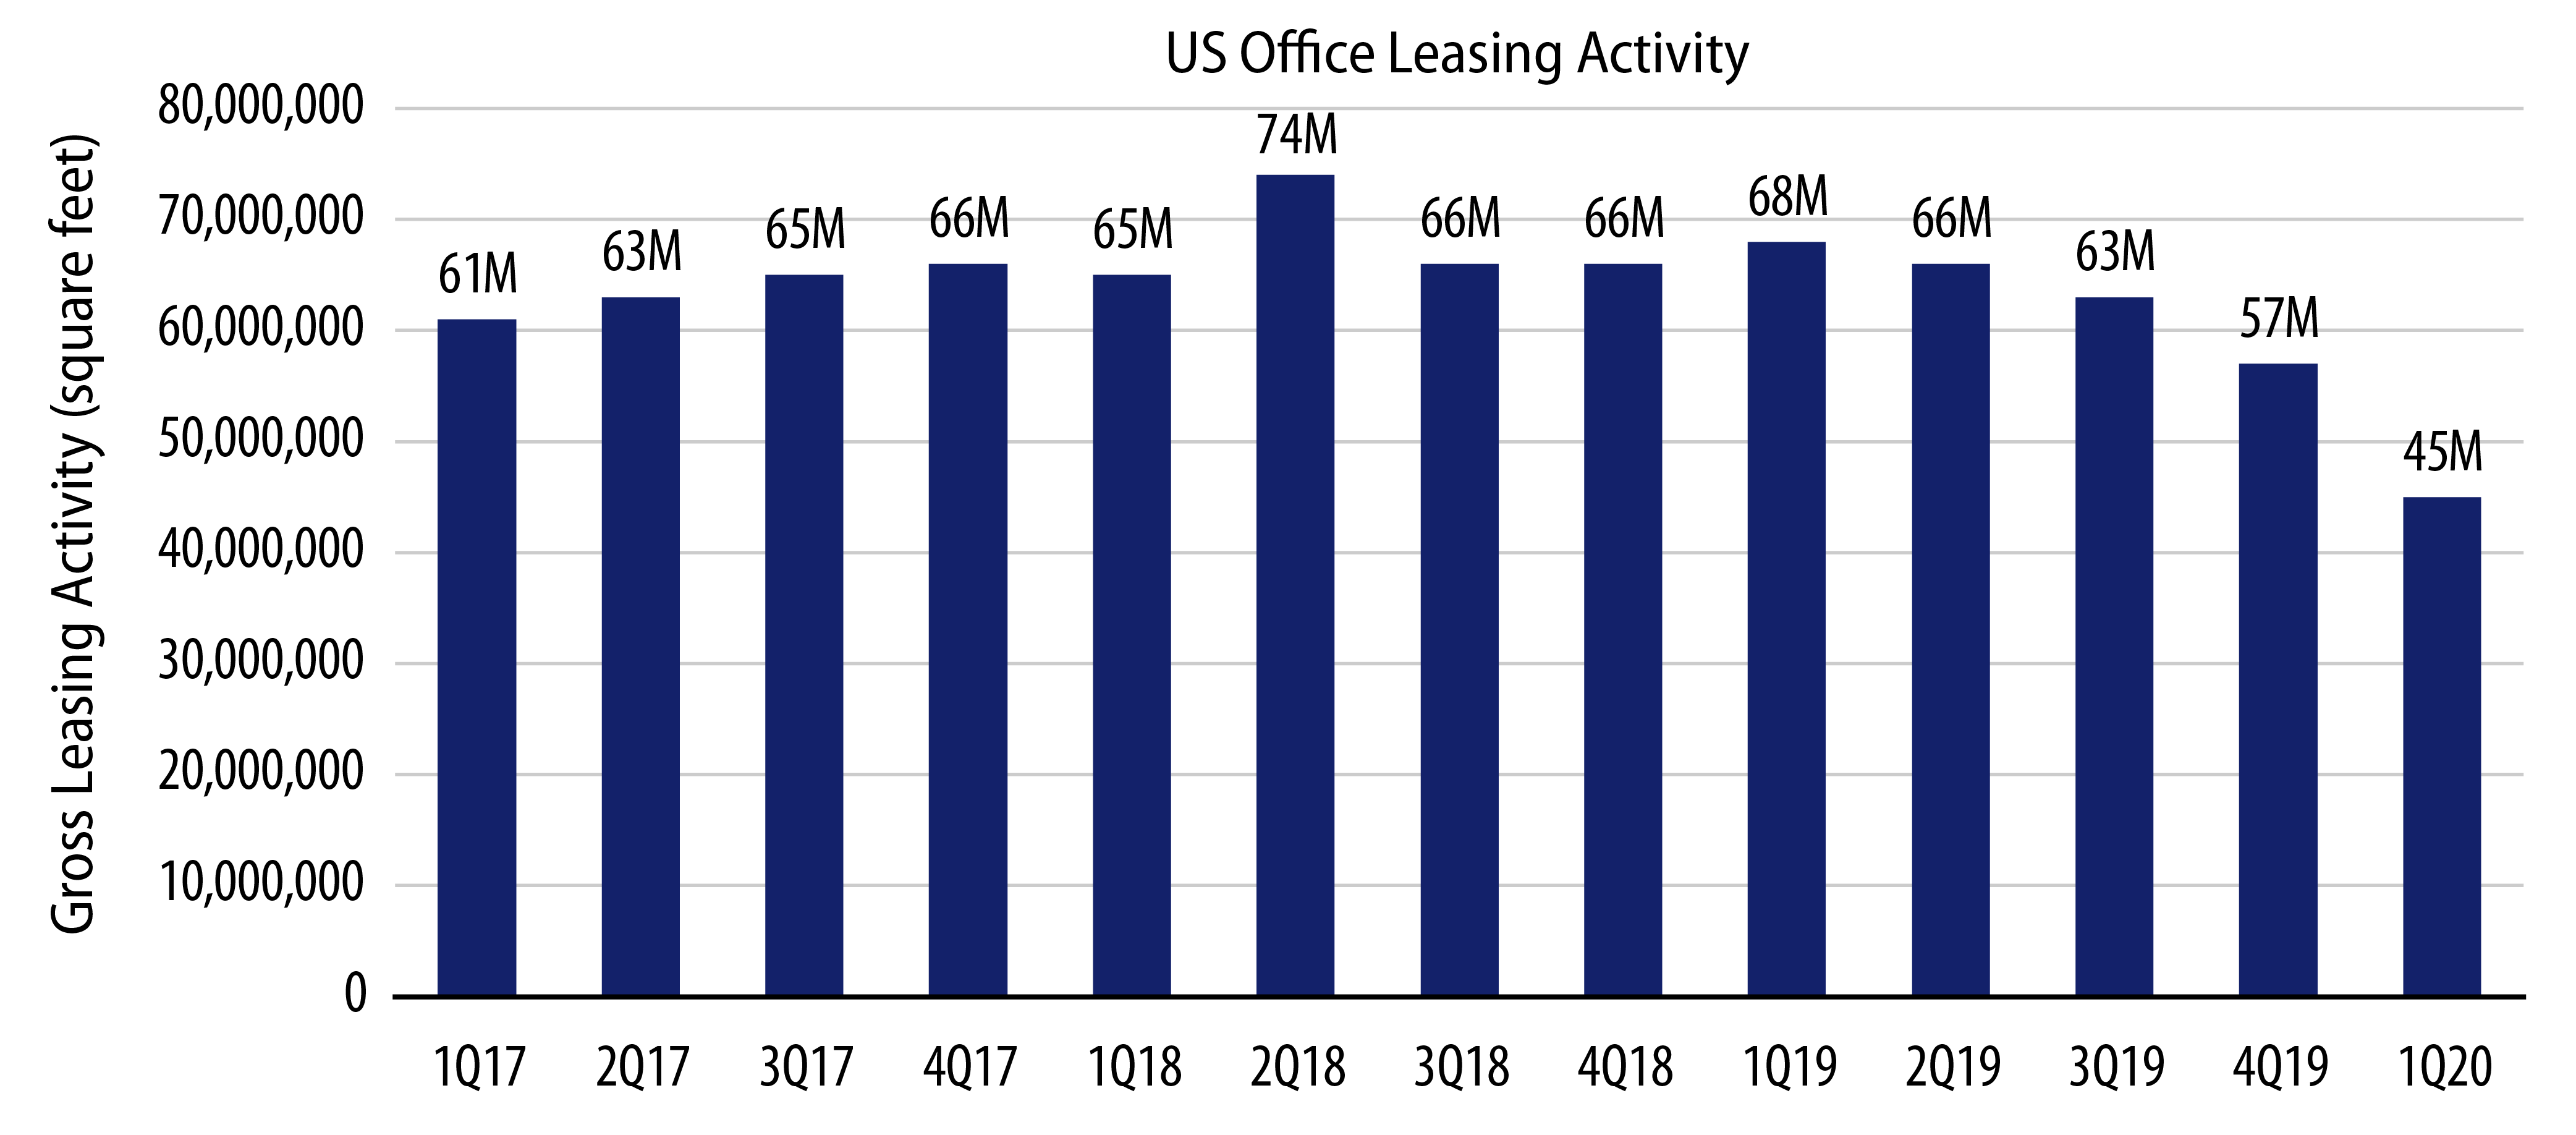 Explore Office Leasing Activity Has Been on the Decline.